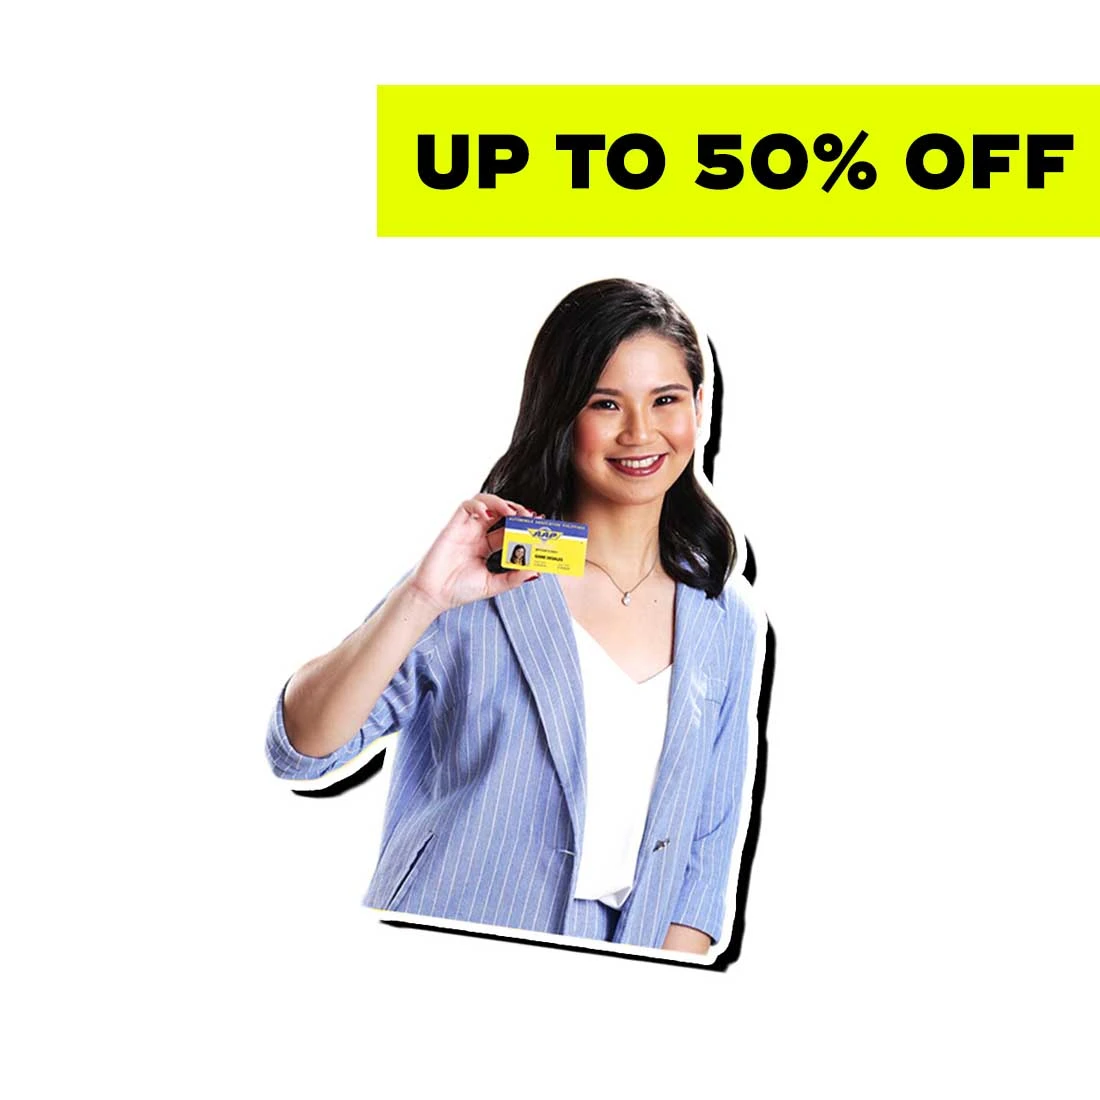 Up to 50% Off on AAP Membership Fees, Products, and Services